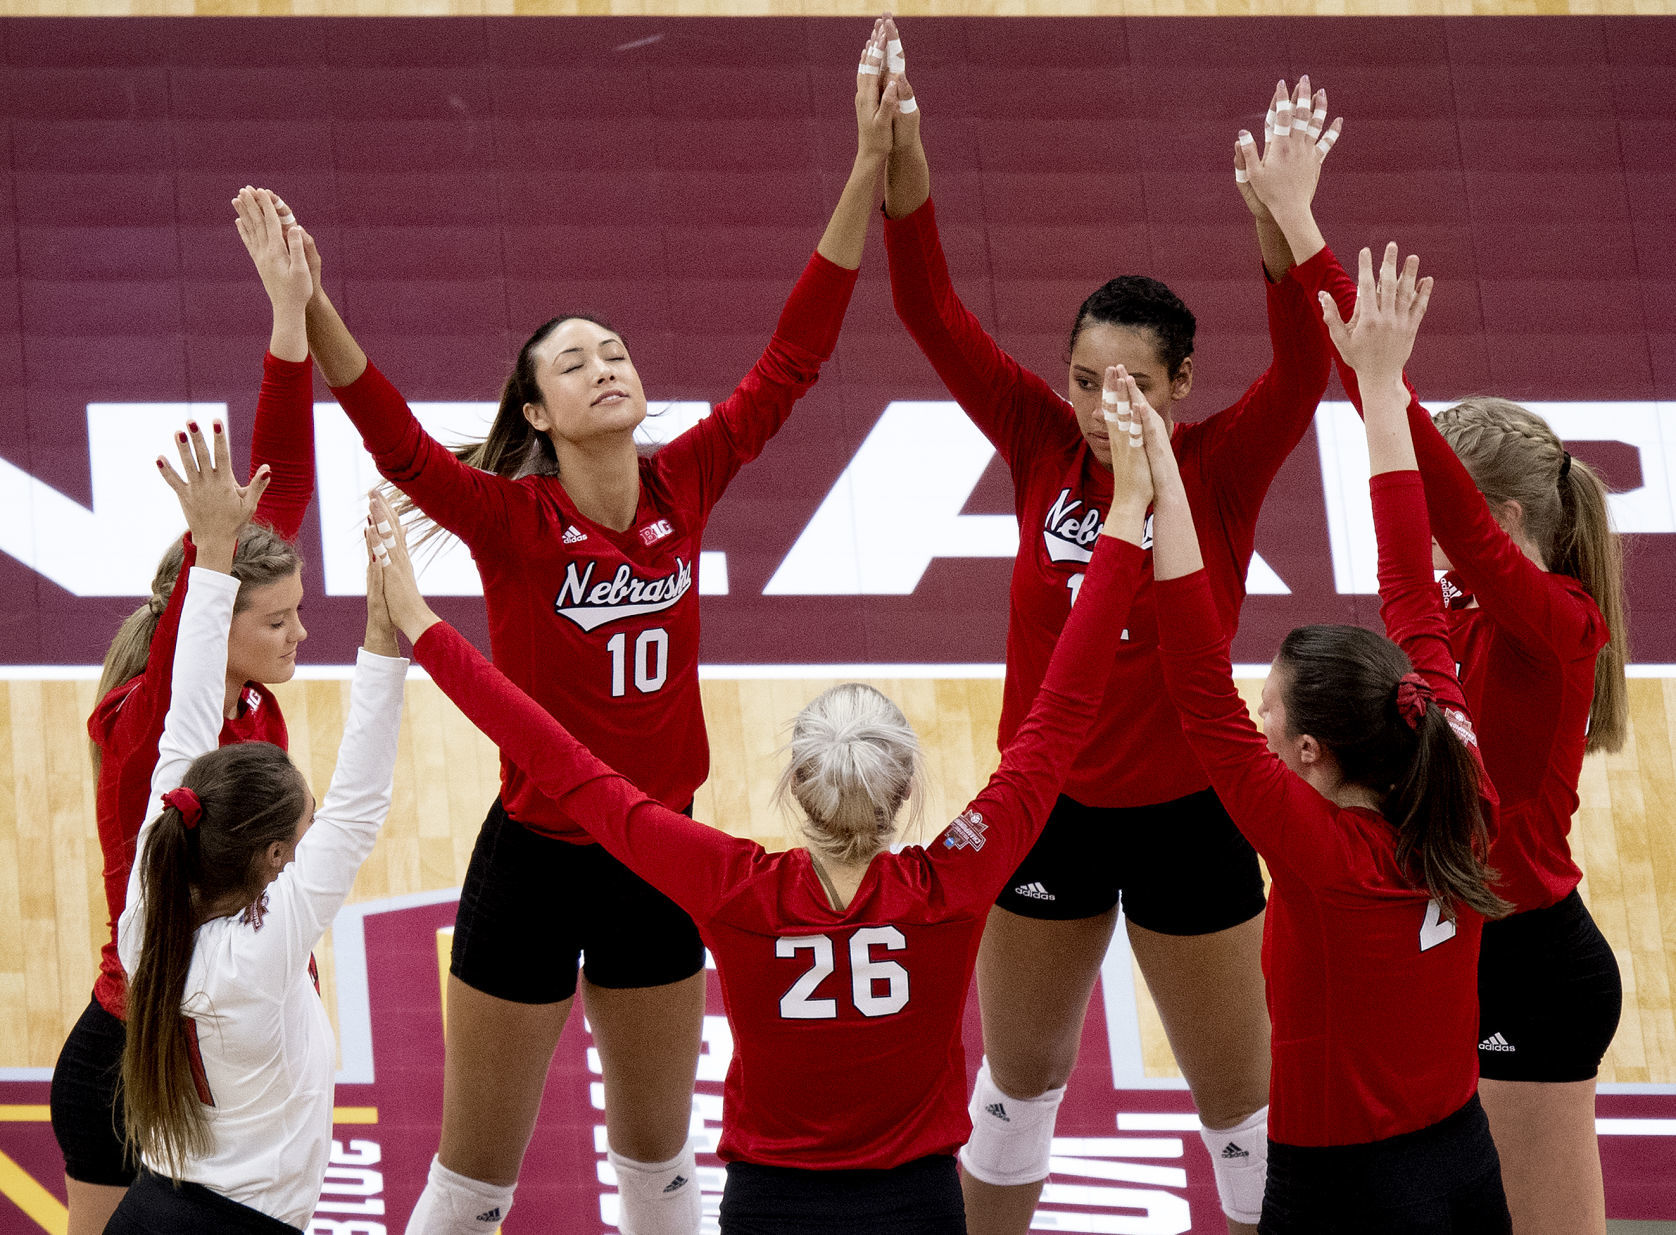 No cable required to watch NU-Stanford volleyball championship game